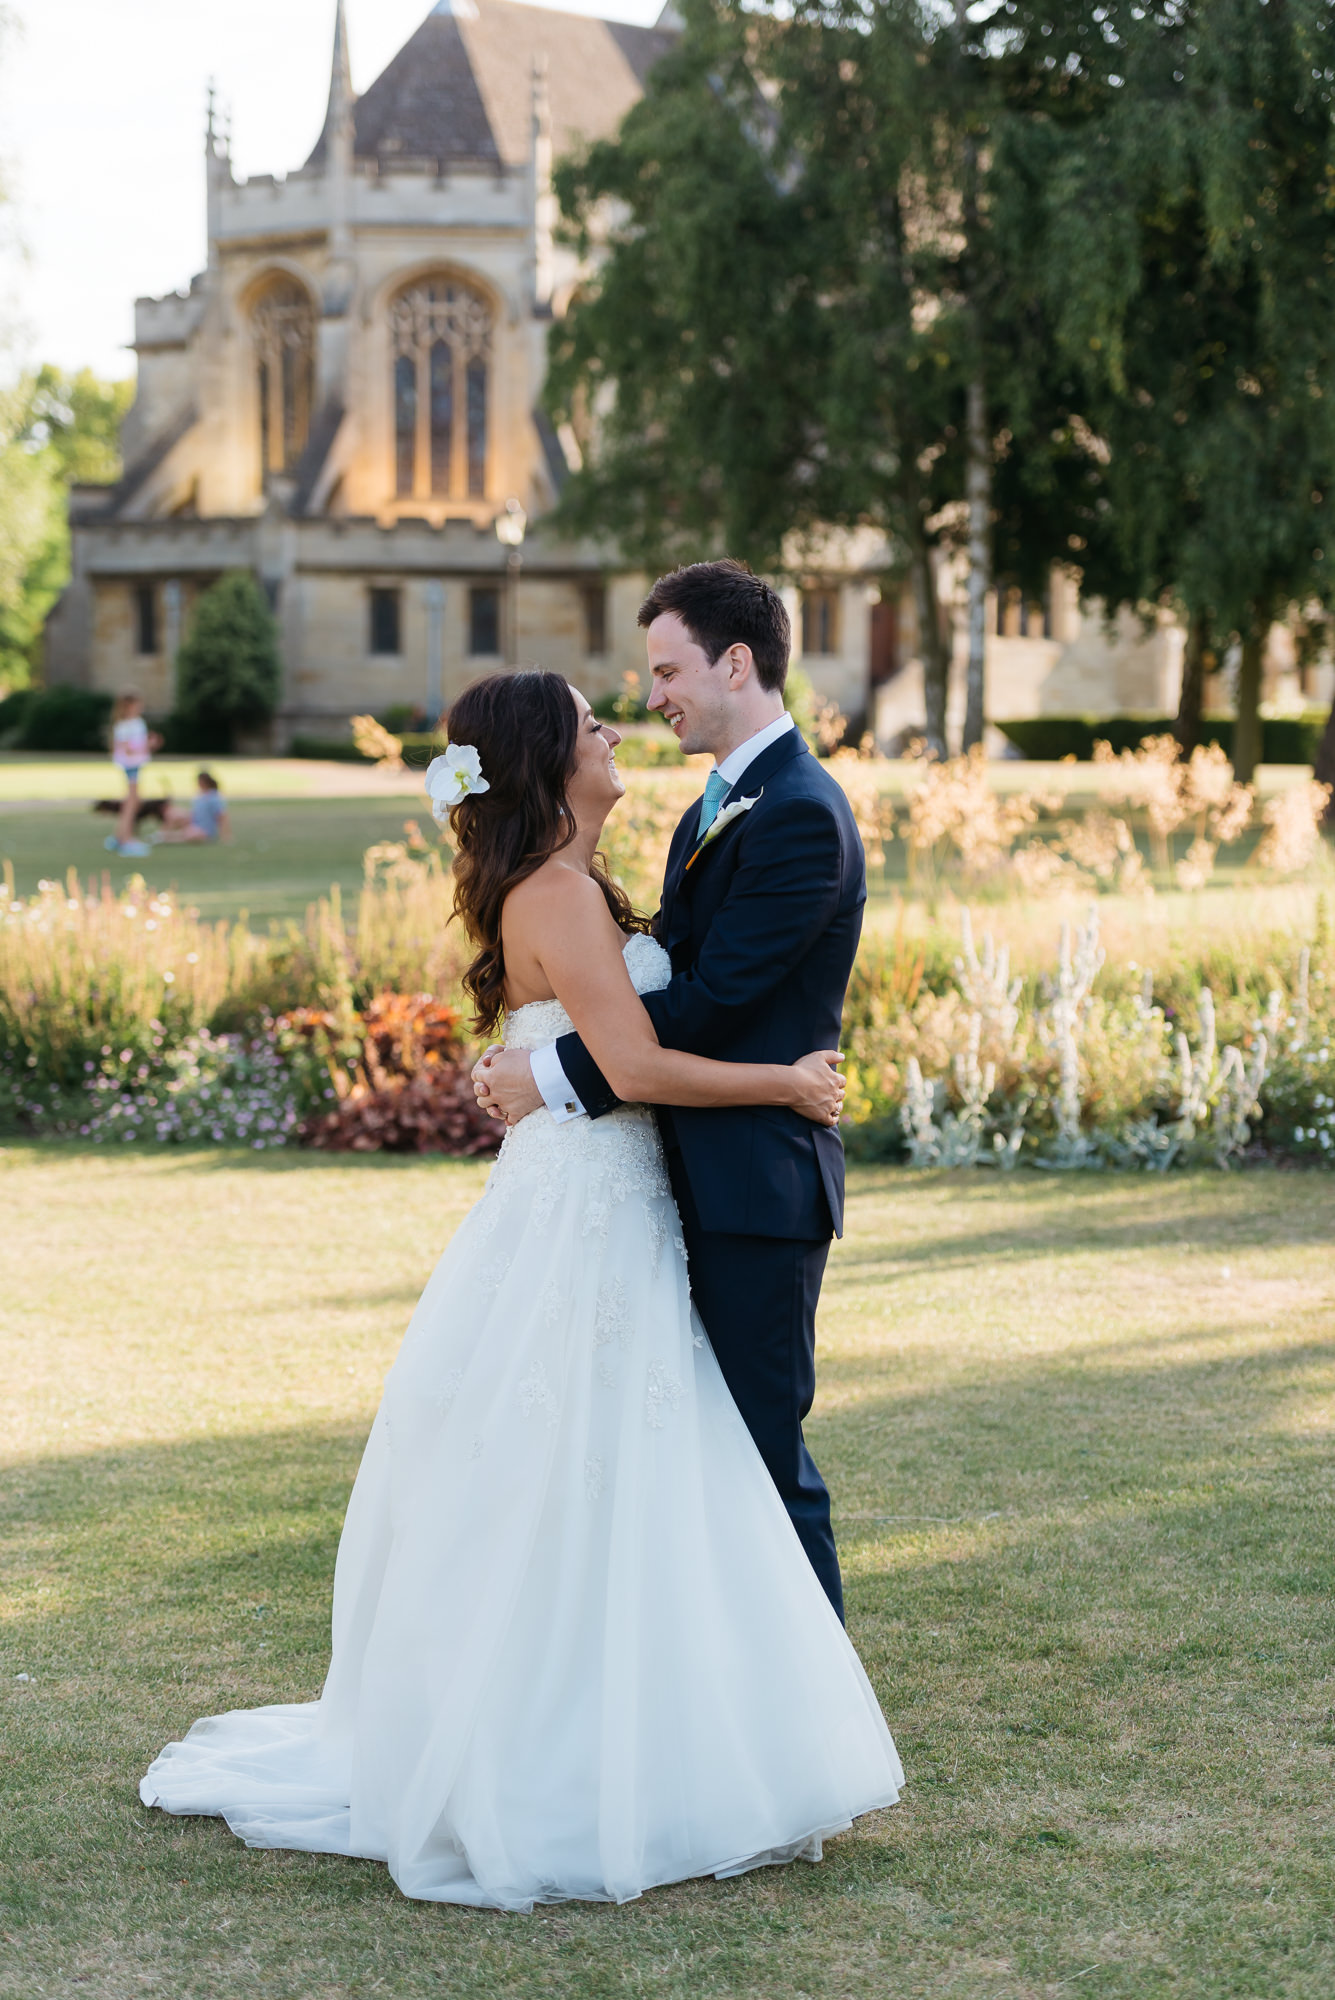 Bride and groom at Oundle wedding